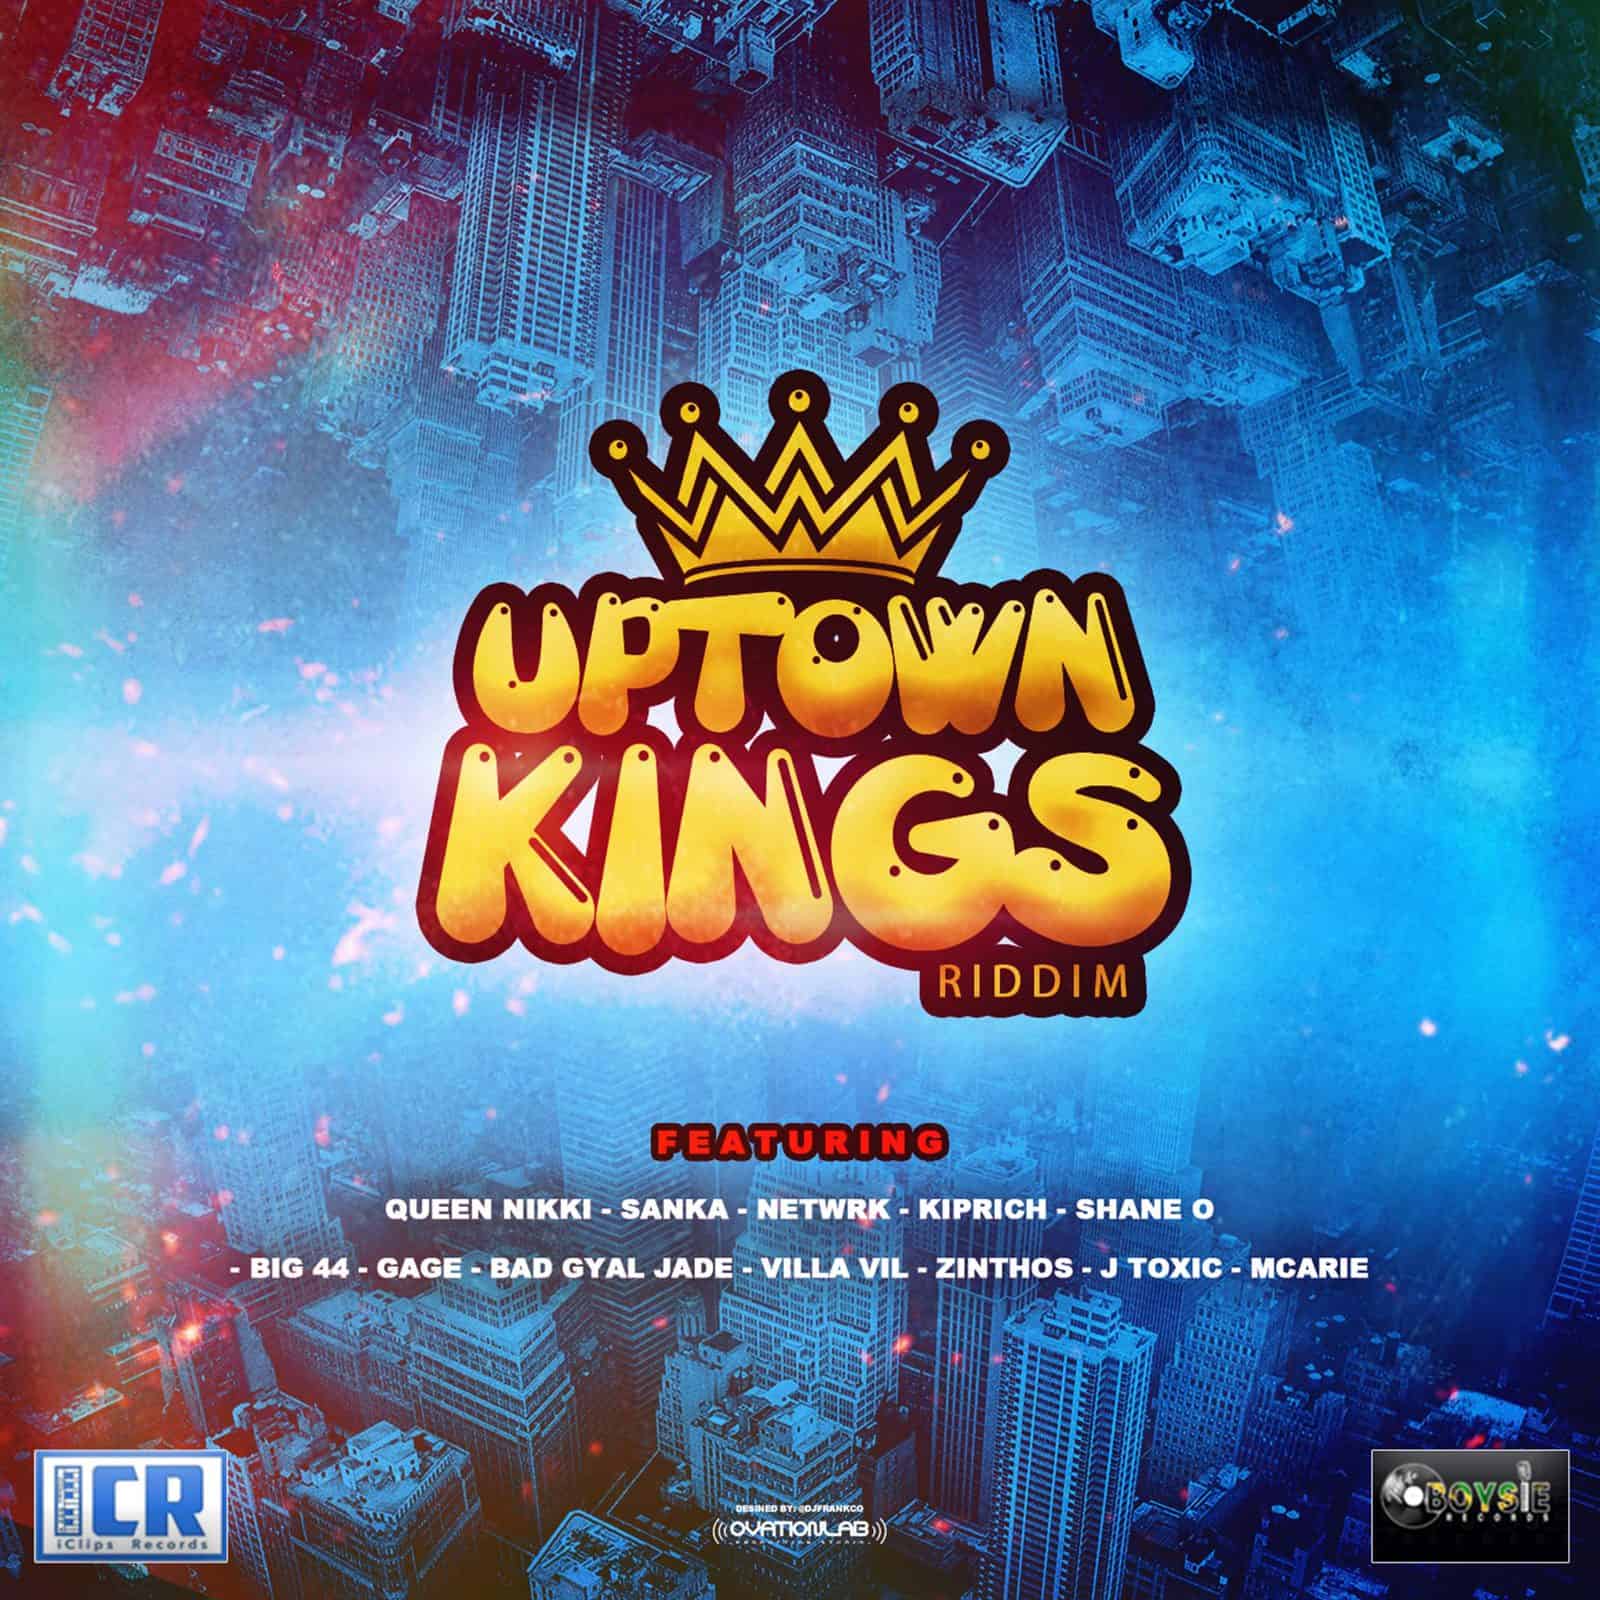 Uptown Kings Riddim - Boysie Records / Iclips Records